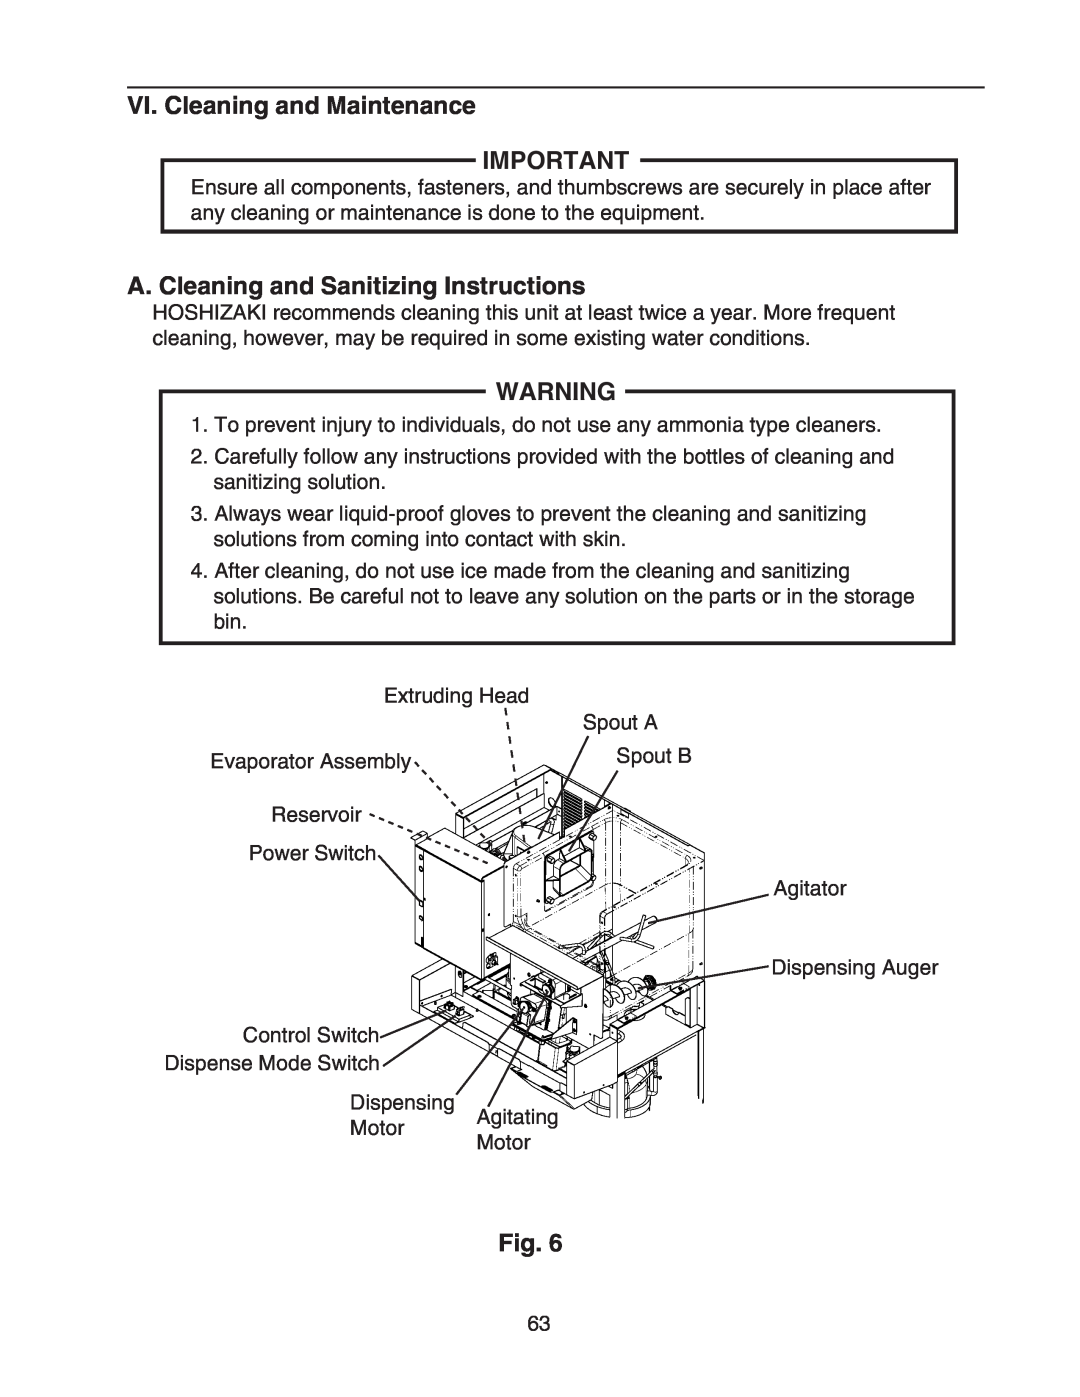 Hoshizaki DCM-500BWH-OS service manual VI. Cleaning and Maintenance, A. Cleaning and Sanitizing Instructions 